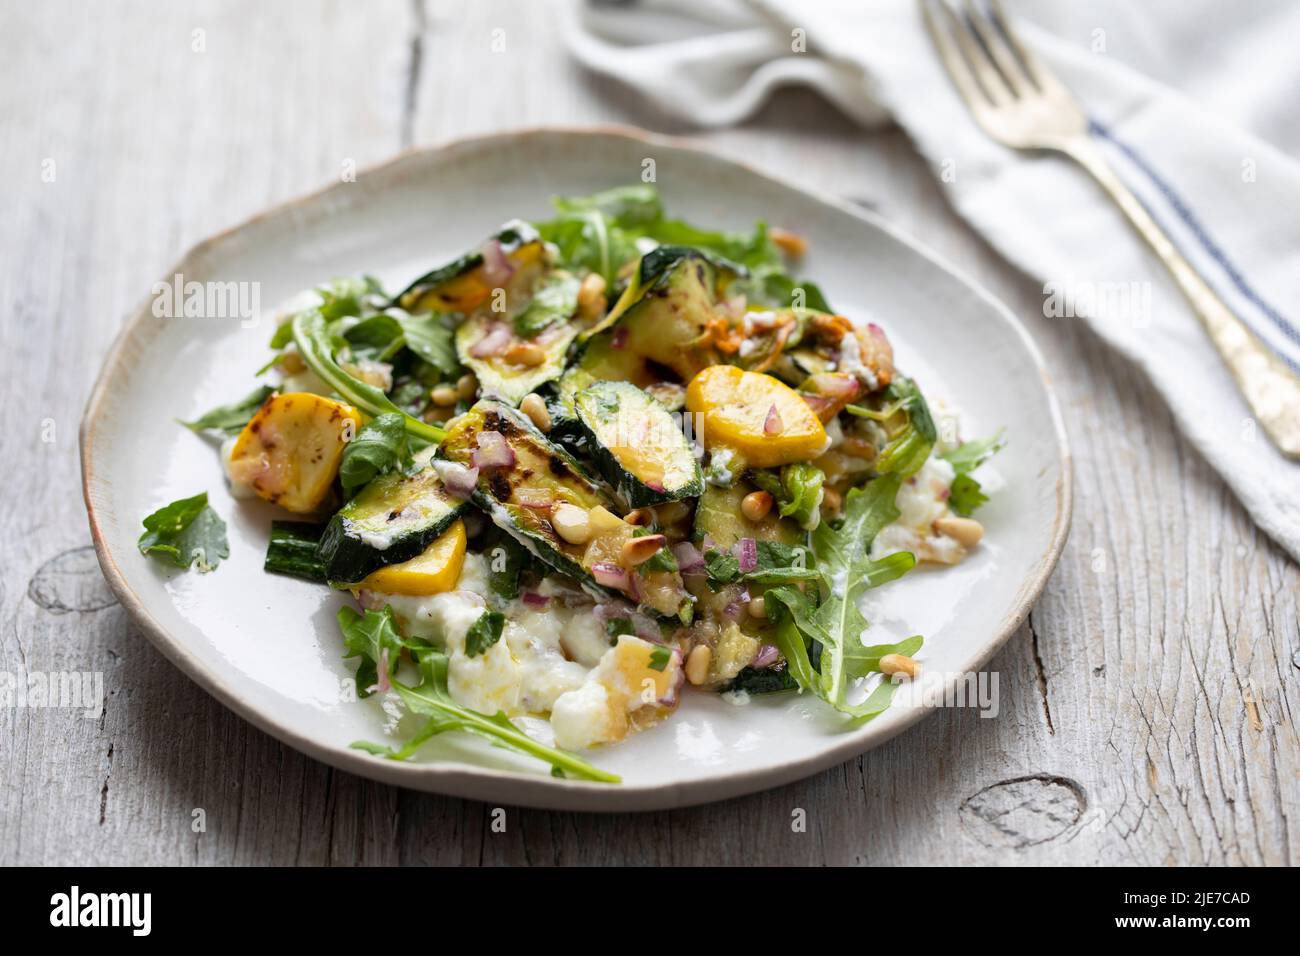 Baby courgette salad on ricotta cheese Stock Photo